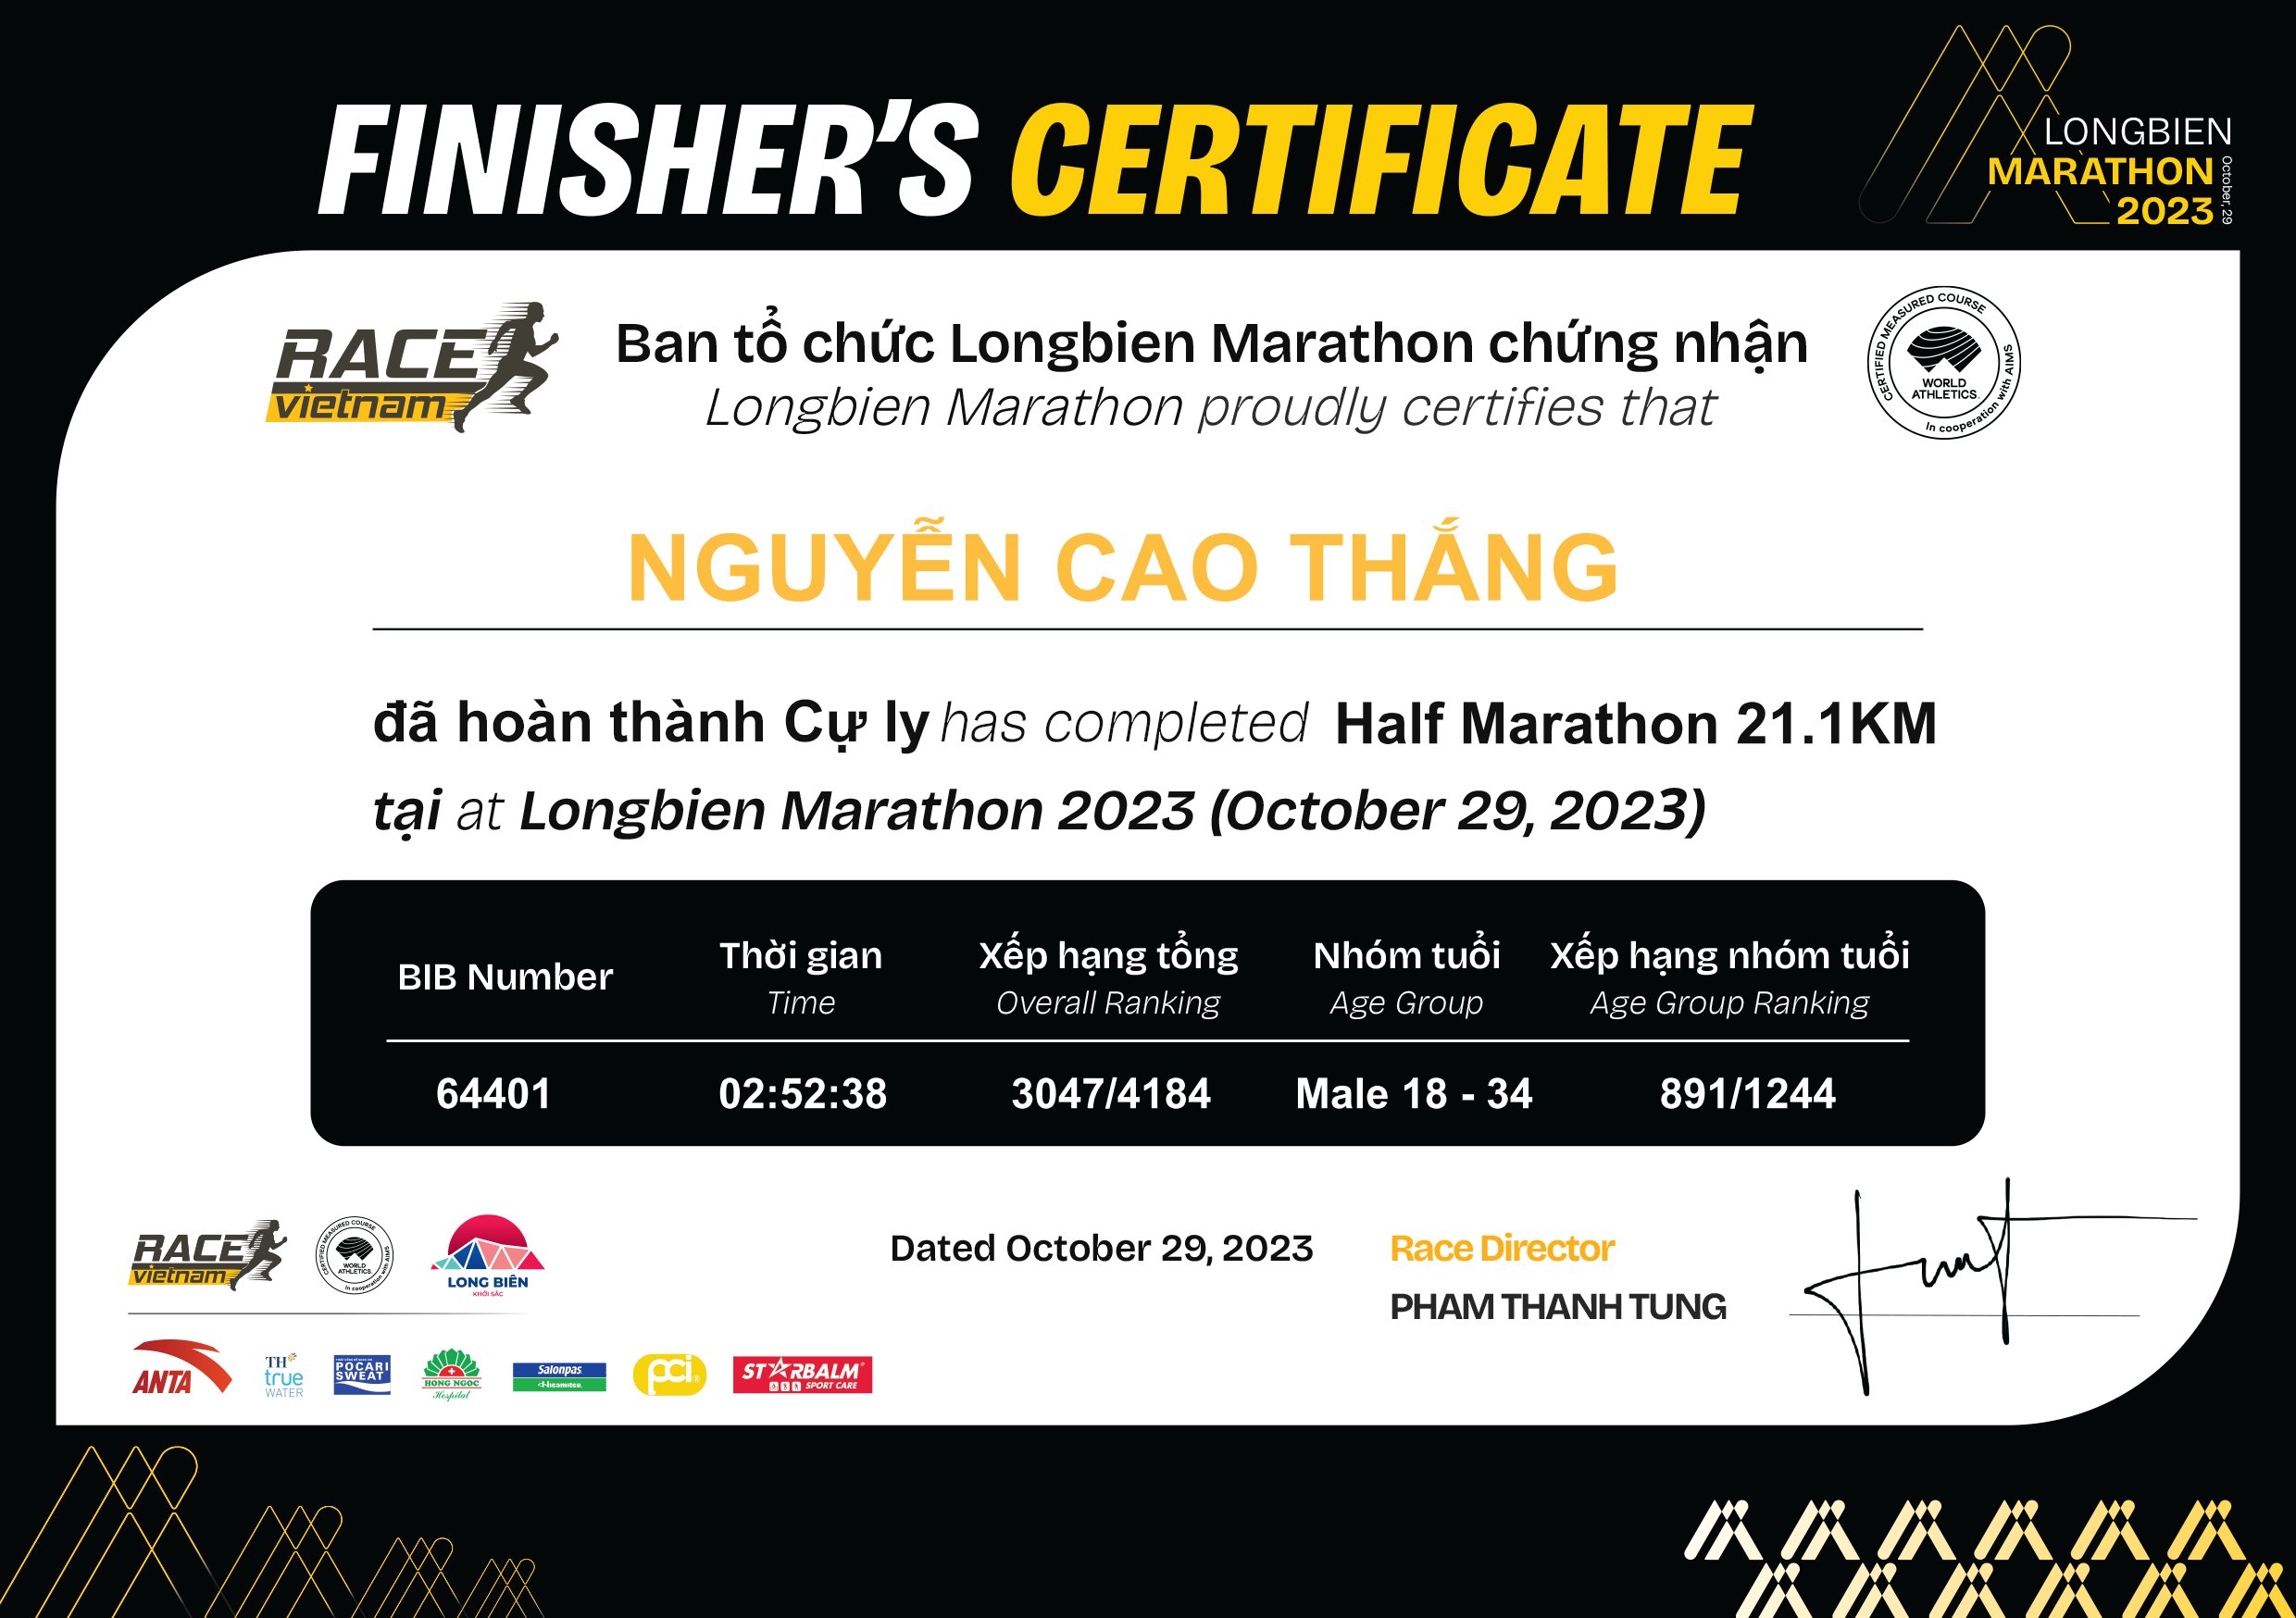 64401 - Nguyễn Cao Thắng